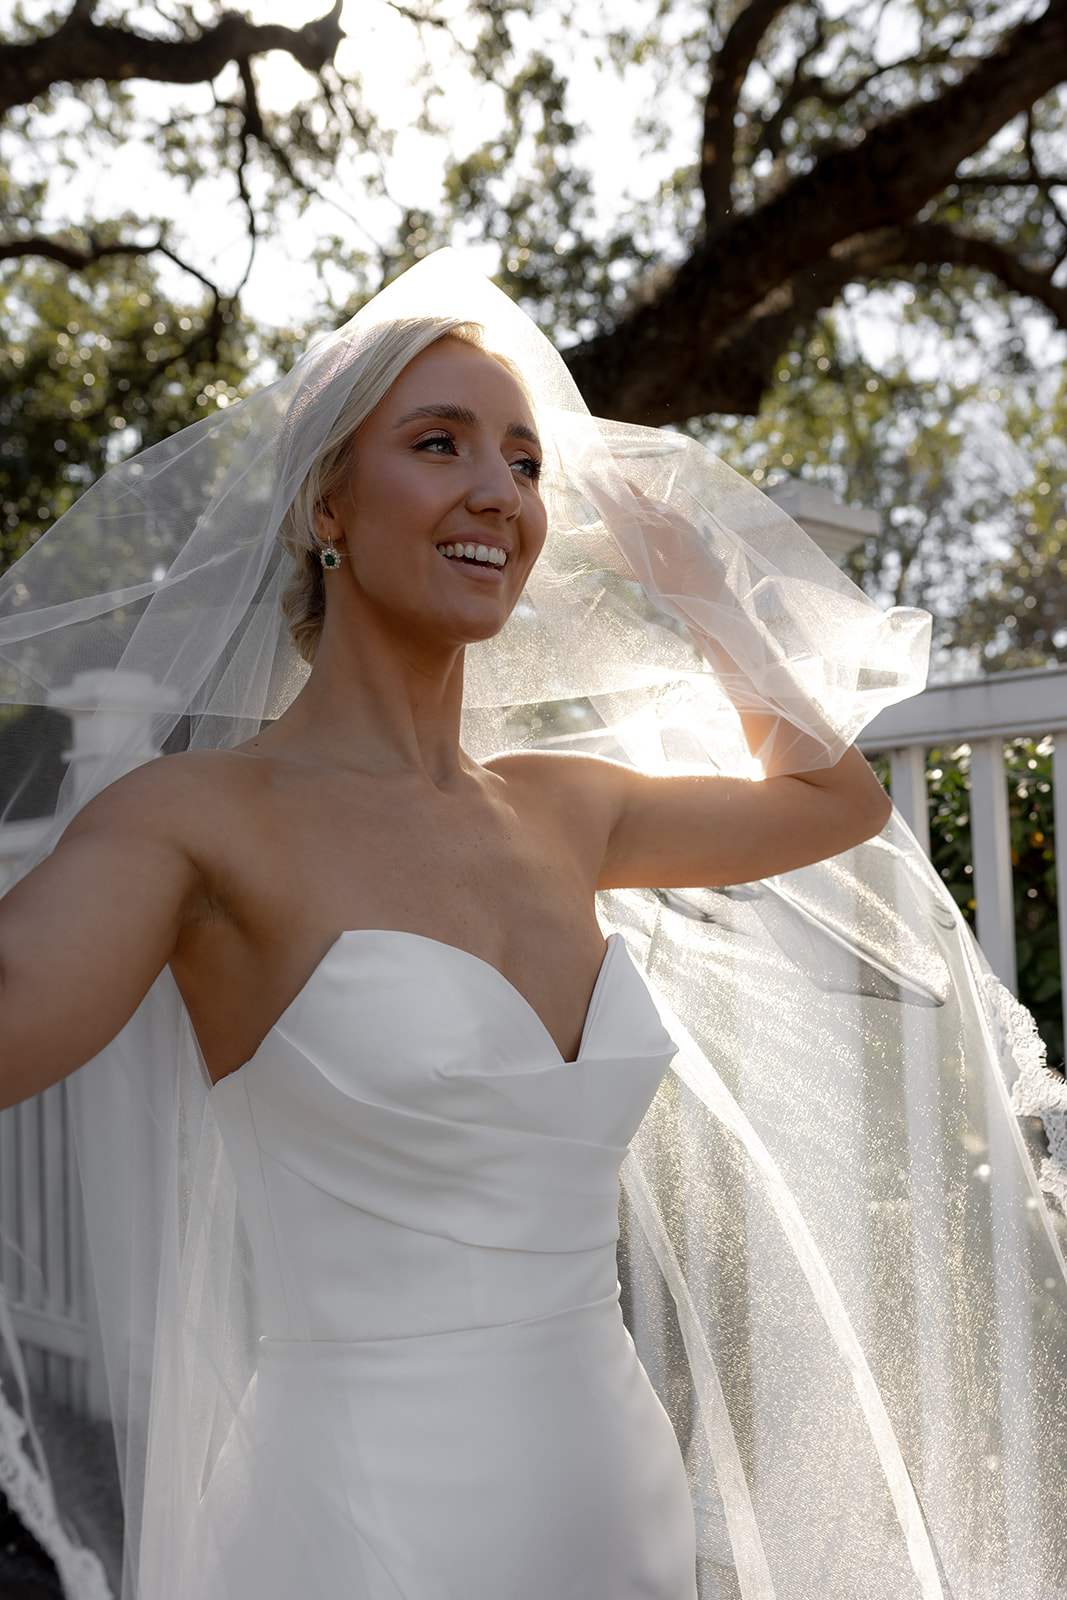 Bride smiling and enjoying wedding dress photo session. Oak tree in background and sunbeams shining through leaves.